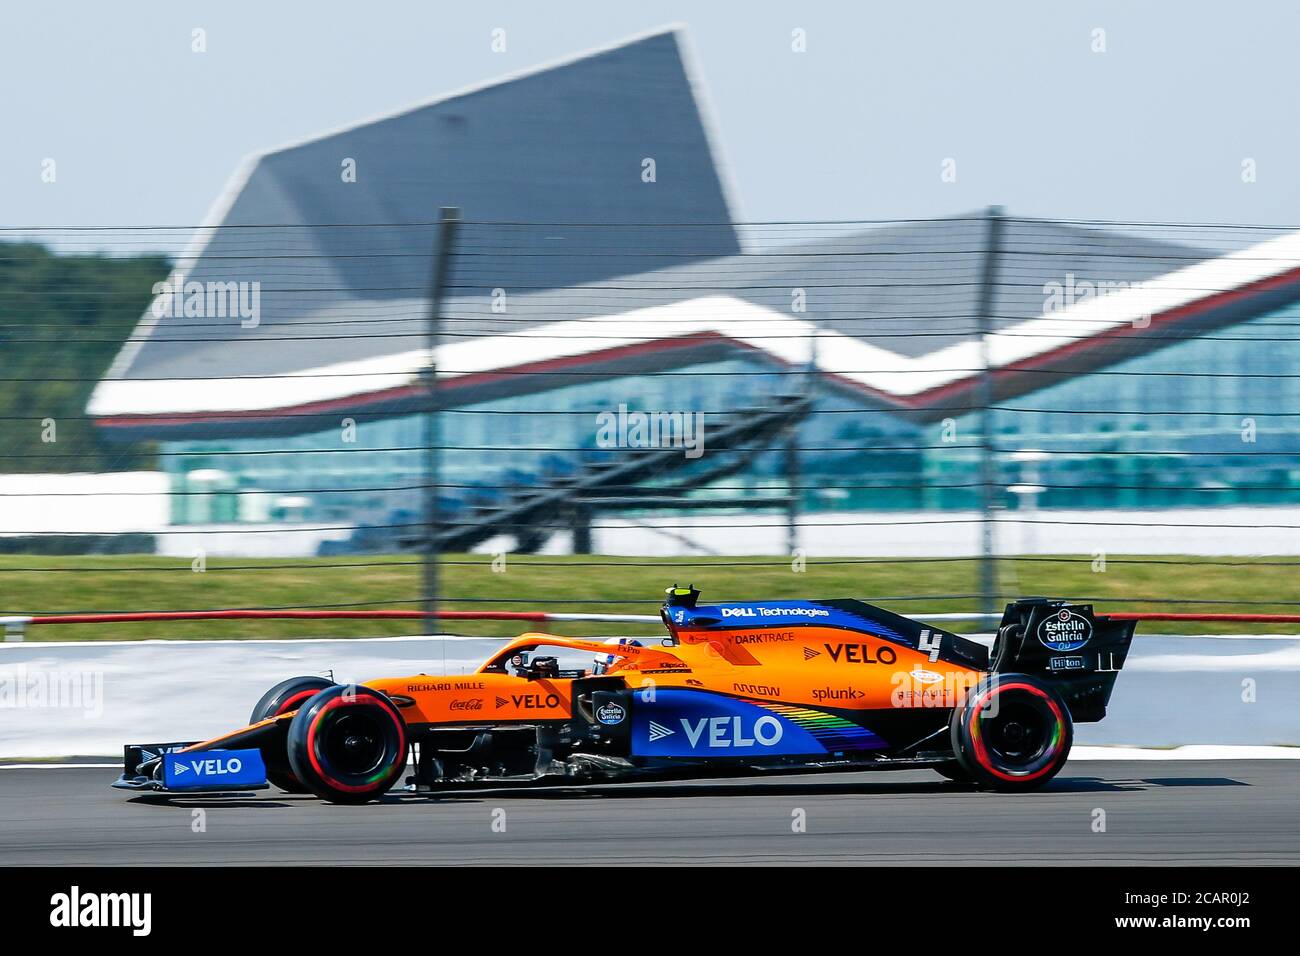 Renault's Lando Norris during third practice of the 70th Anniversary Formula One Grand Prix at Silverstone Race circuit, Northampton. Stock Photo